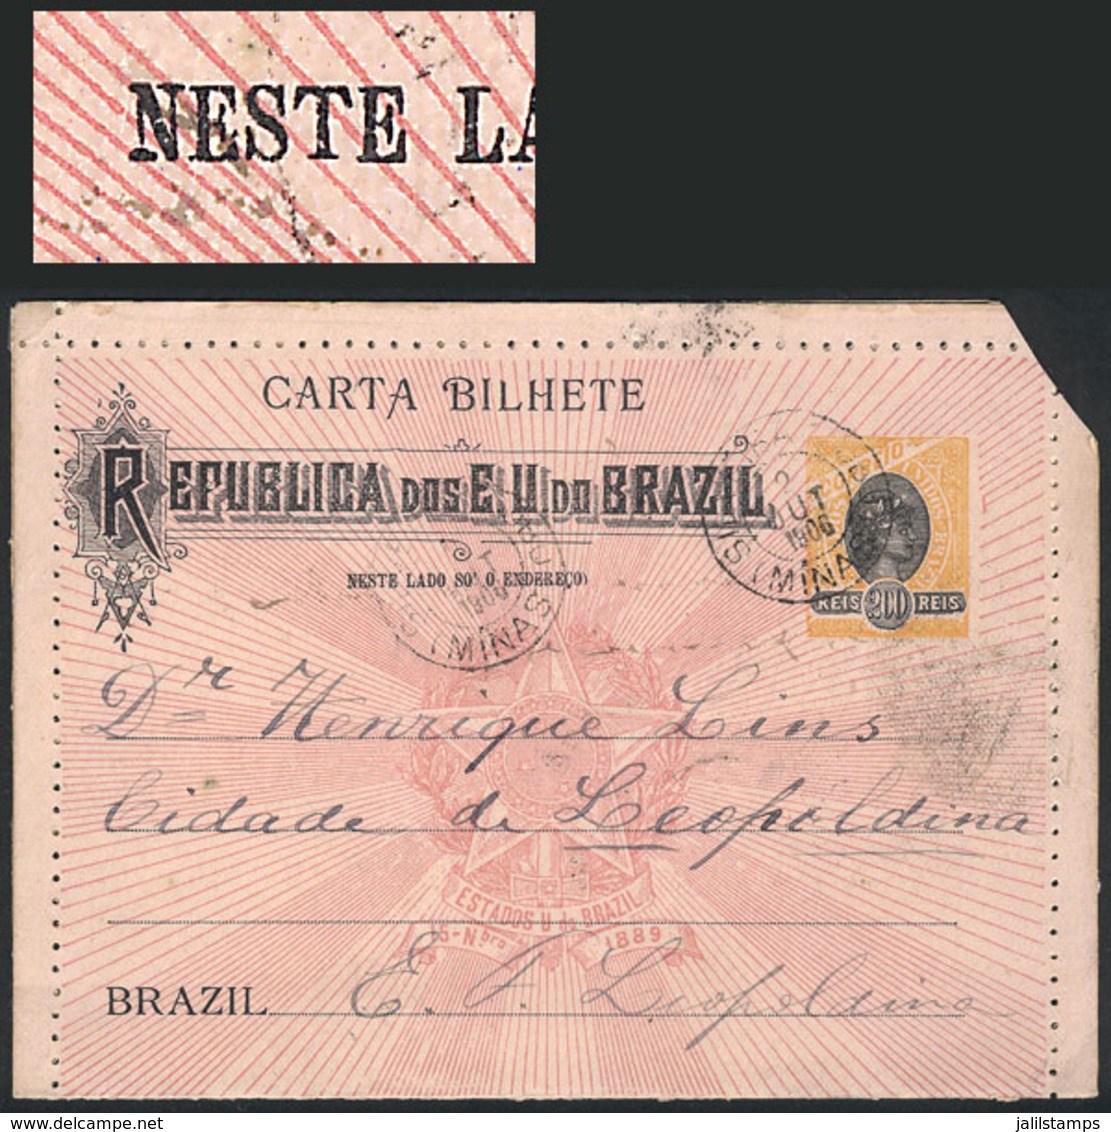 BRAZIL: RHM.CB-71J, Lettercard, Without Parenthesis Before "NESTE", Used In 1906, Fine Quality, Catalog Value 300Rs." - Ganzsachen